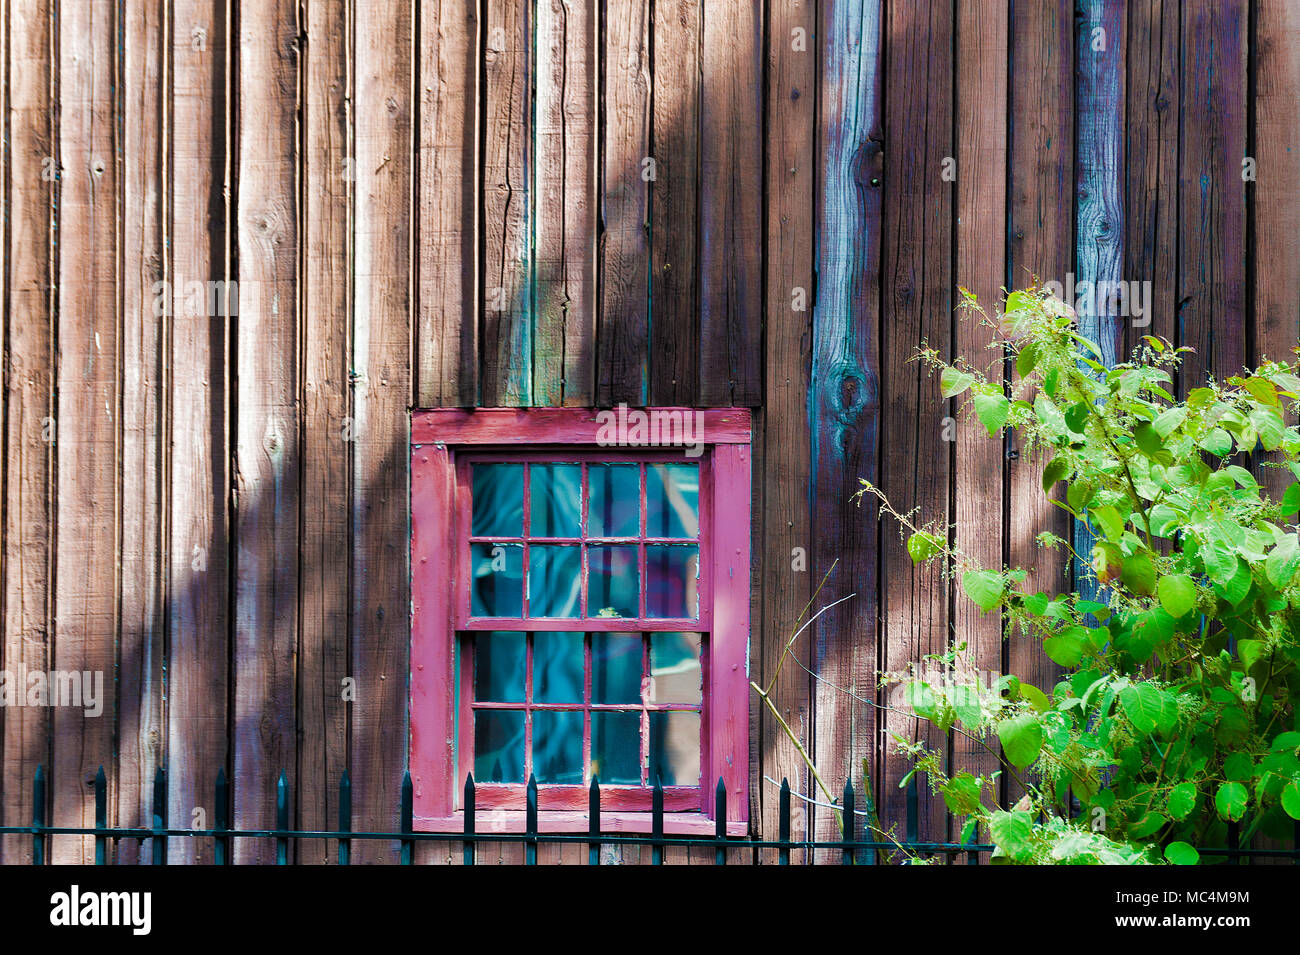 An old wooden building with a red framed window, sunlight casting shadows in this background image. Stock Photo